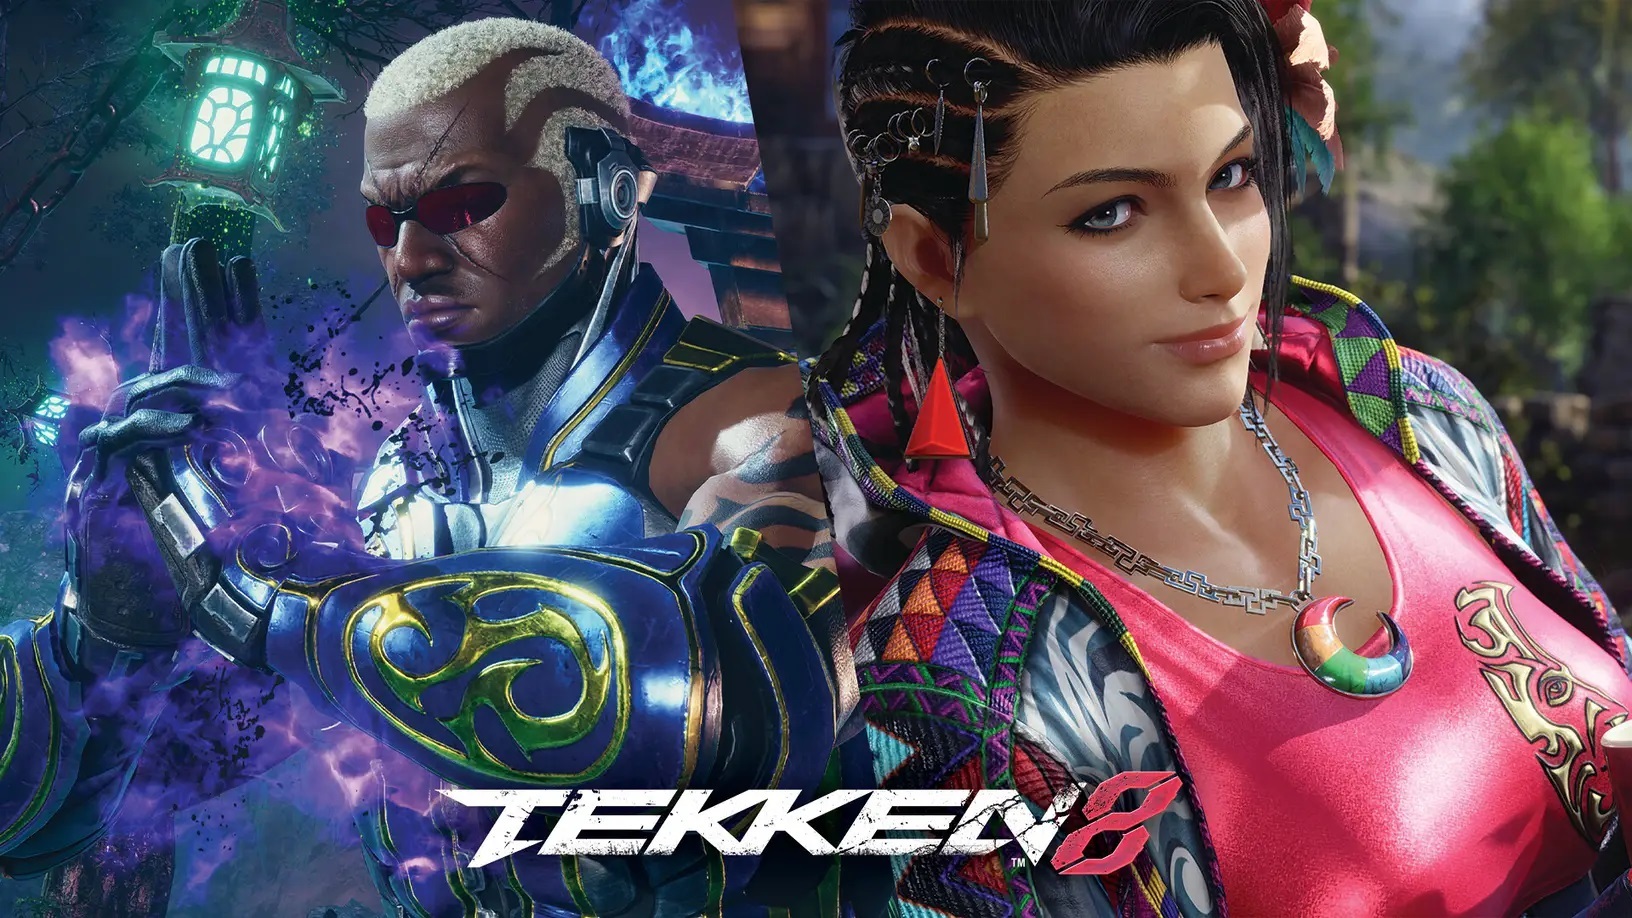 Tekken 8 confirms new and returning characters in gameplay trailers